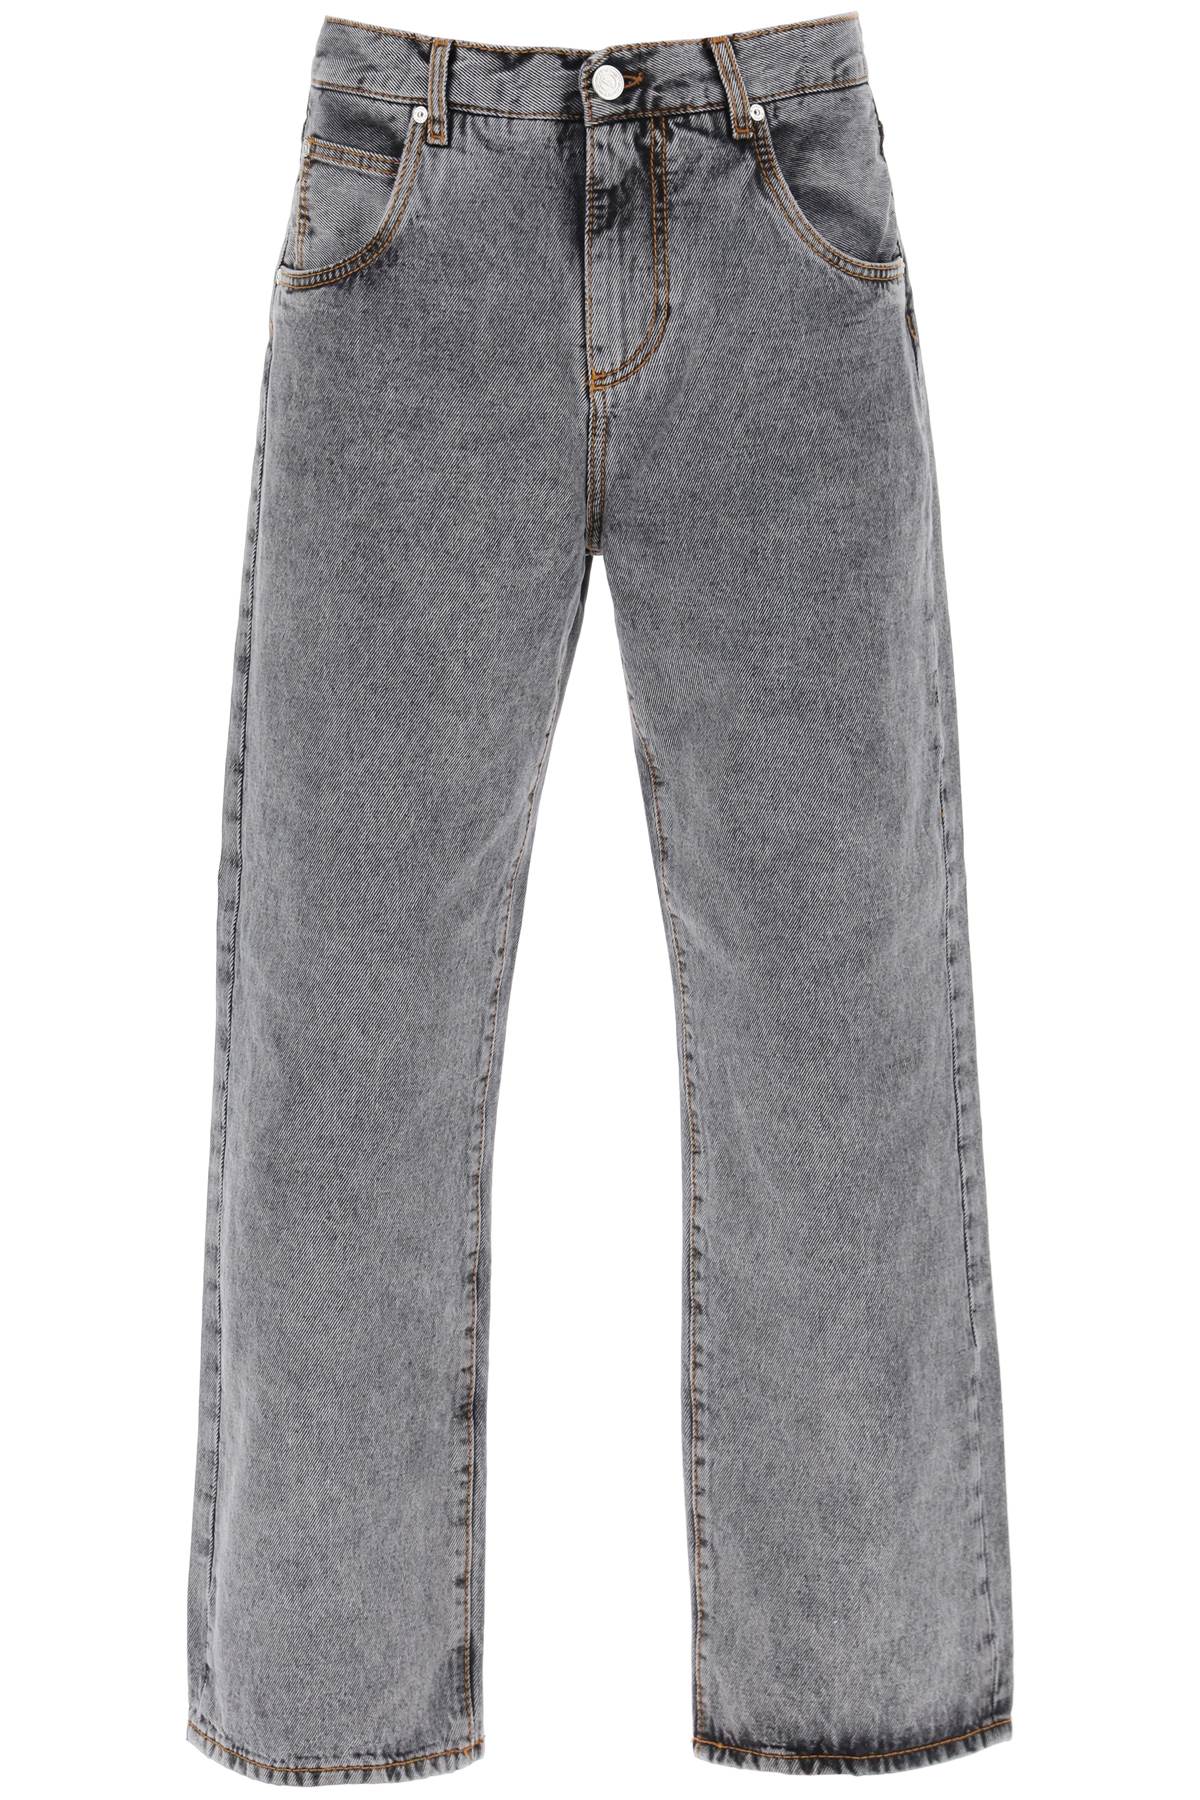 Etro easy fit jeans-0